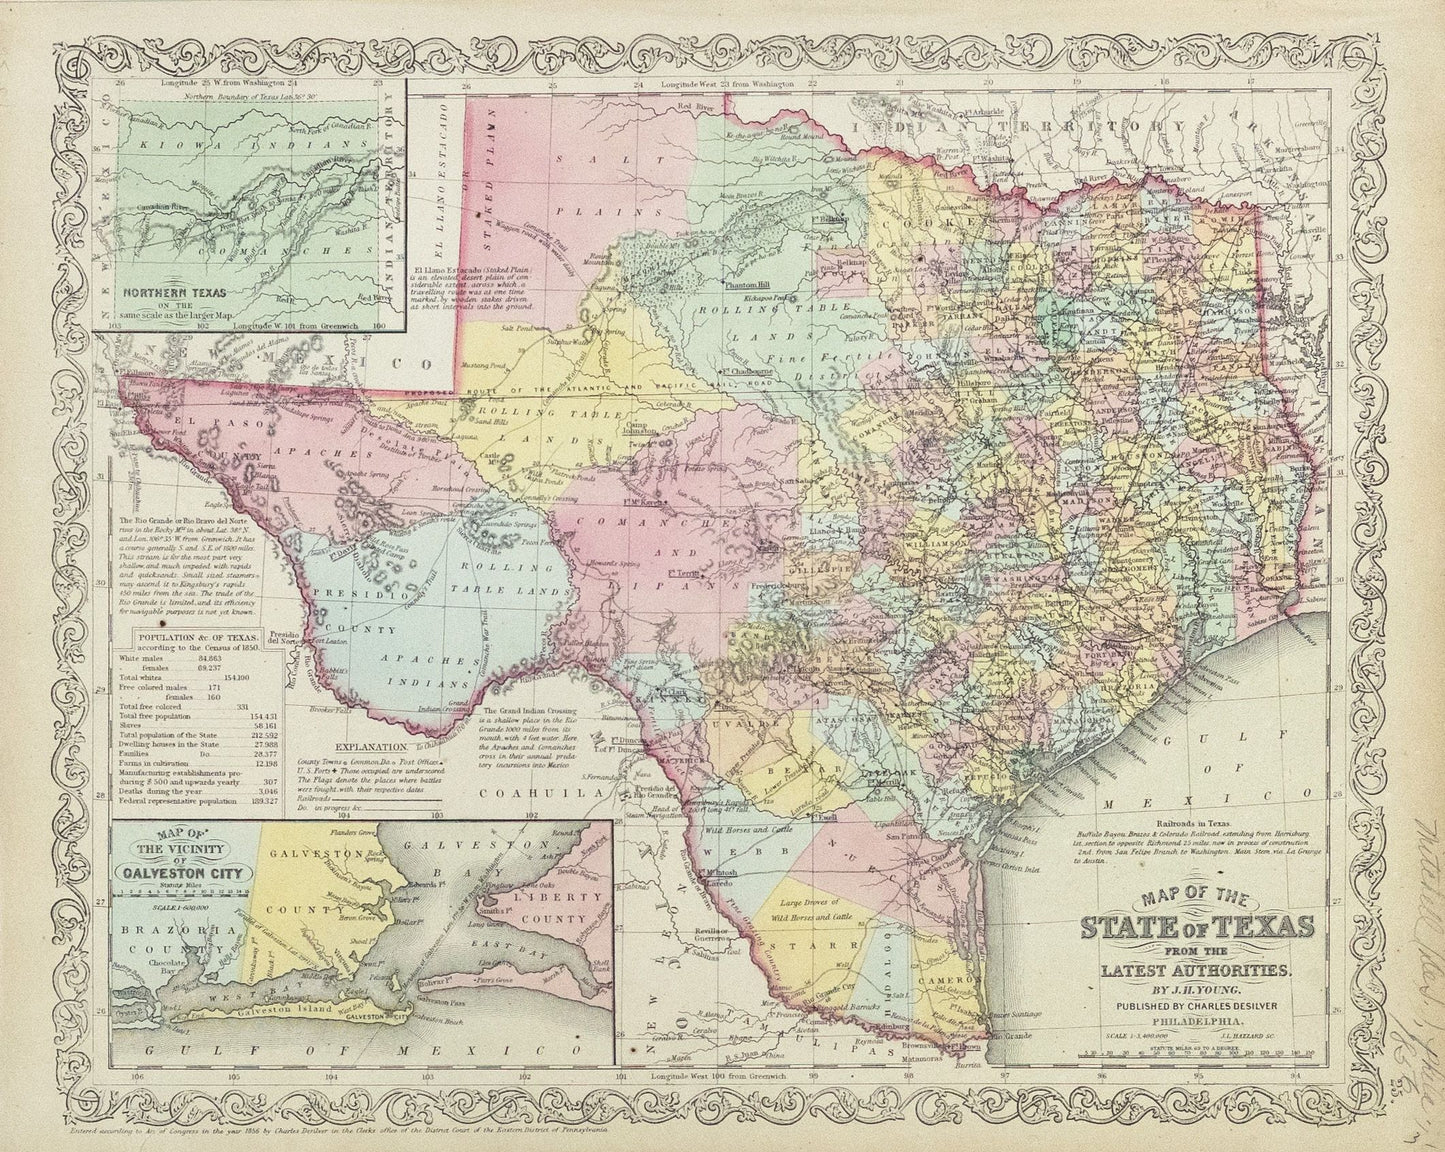 Young, J.H..  Map of the State of Texas from The Latest Authorities.  Philadelphia: Charles Desilver, 1856.